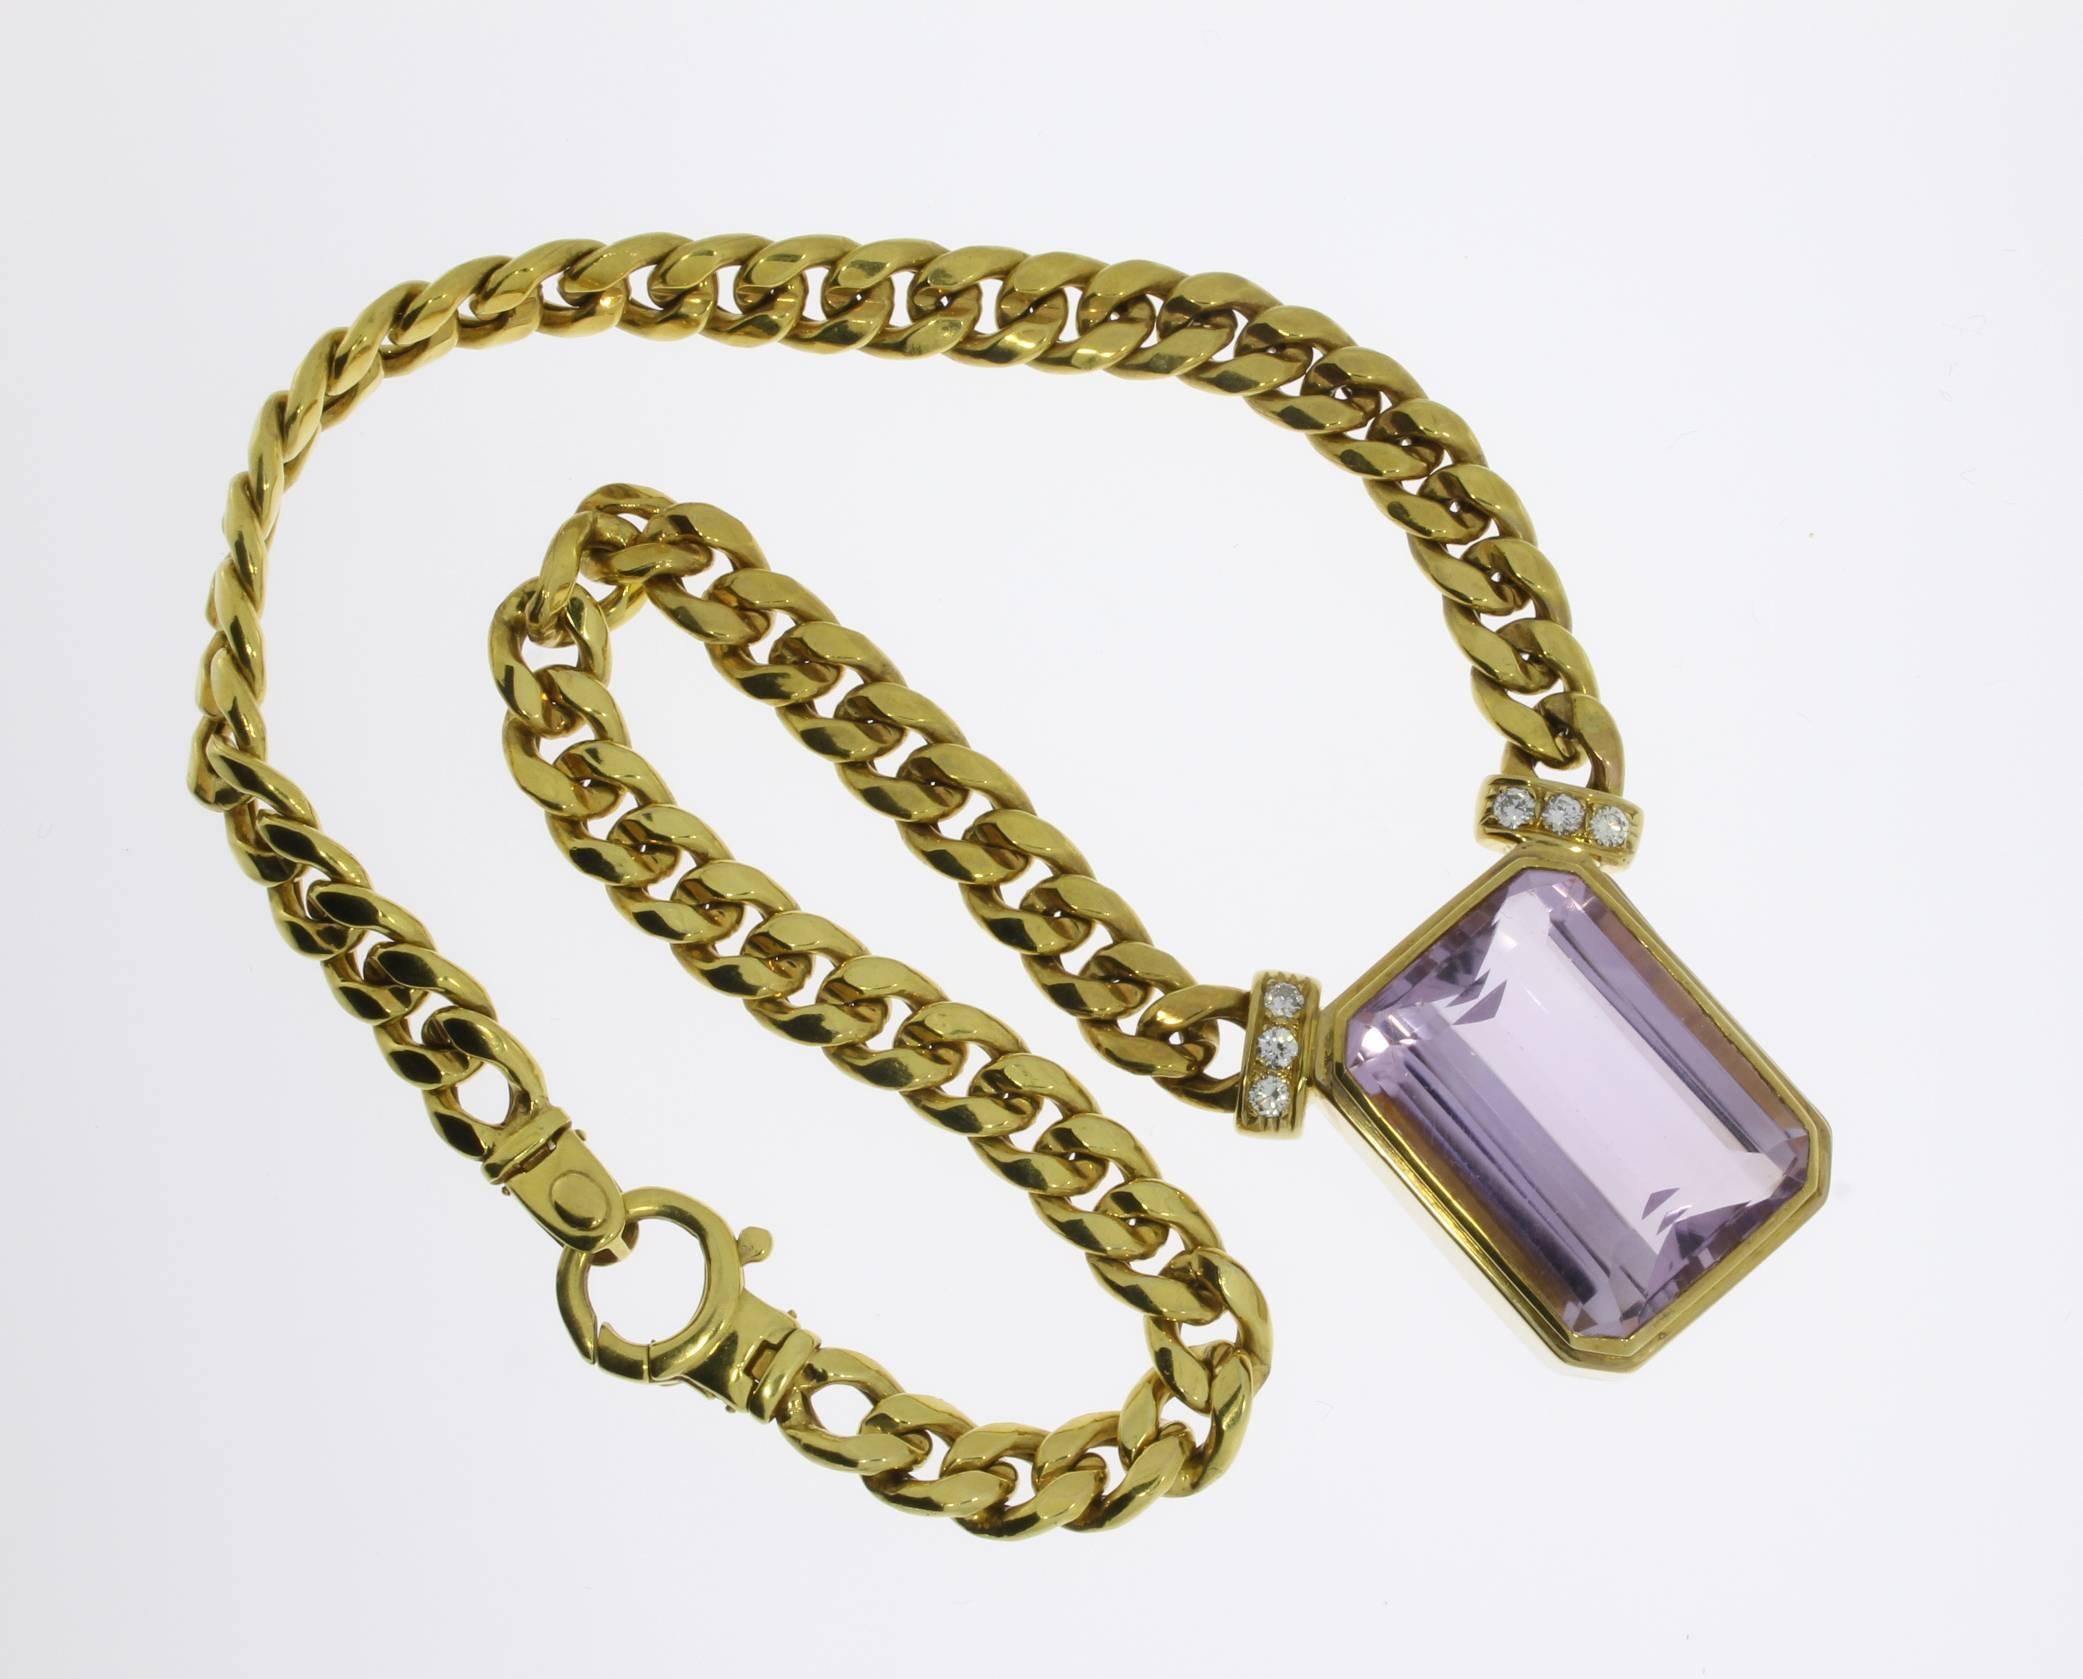 Striking curb in 14 K yellow gold with large emerald-cut amethyst weighing circa 84 ct. at the top accented by 6 brilliant-cut diamonds with a total weight of ca. 0,75 ct. On the clasp hallmarked with 585. Total weight: 82,3 g. 
Length: 9.72 in (